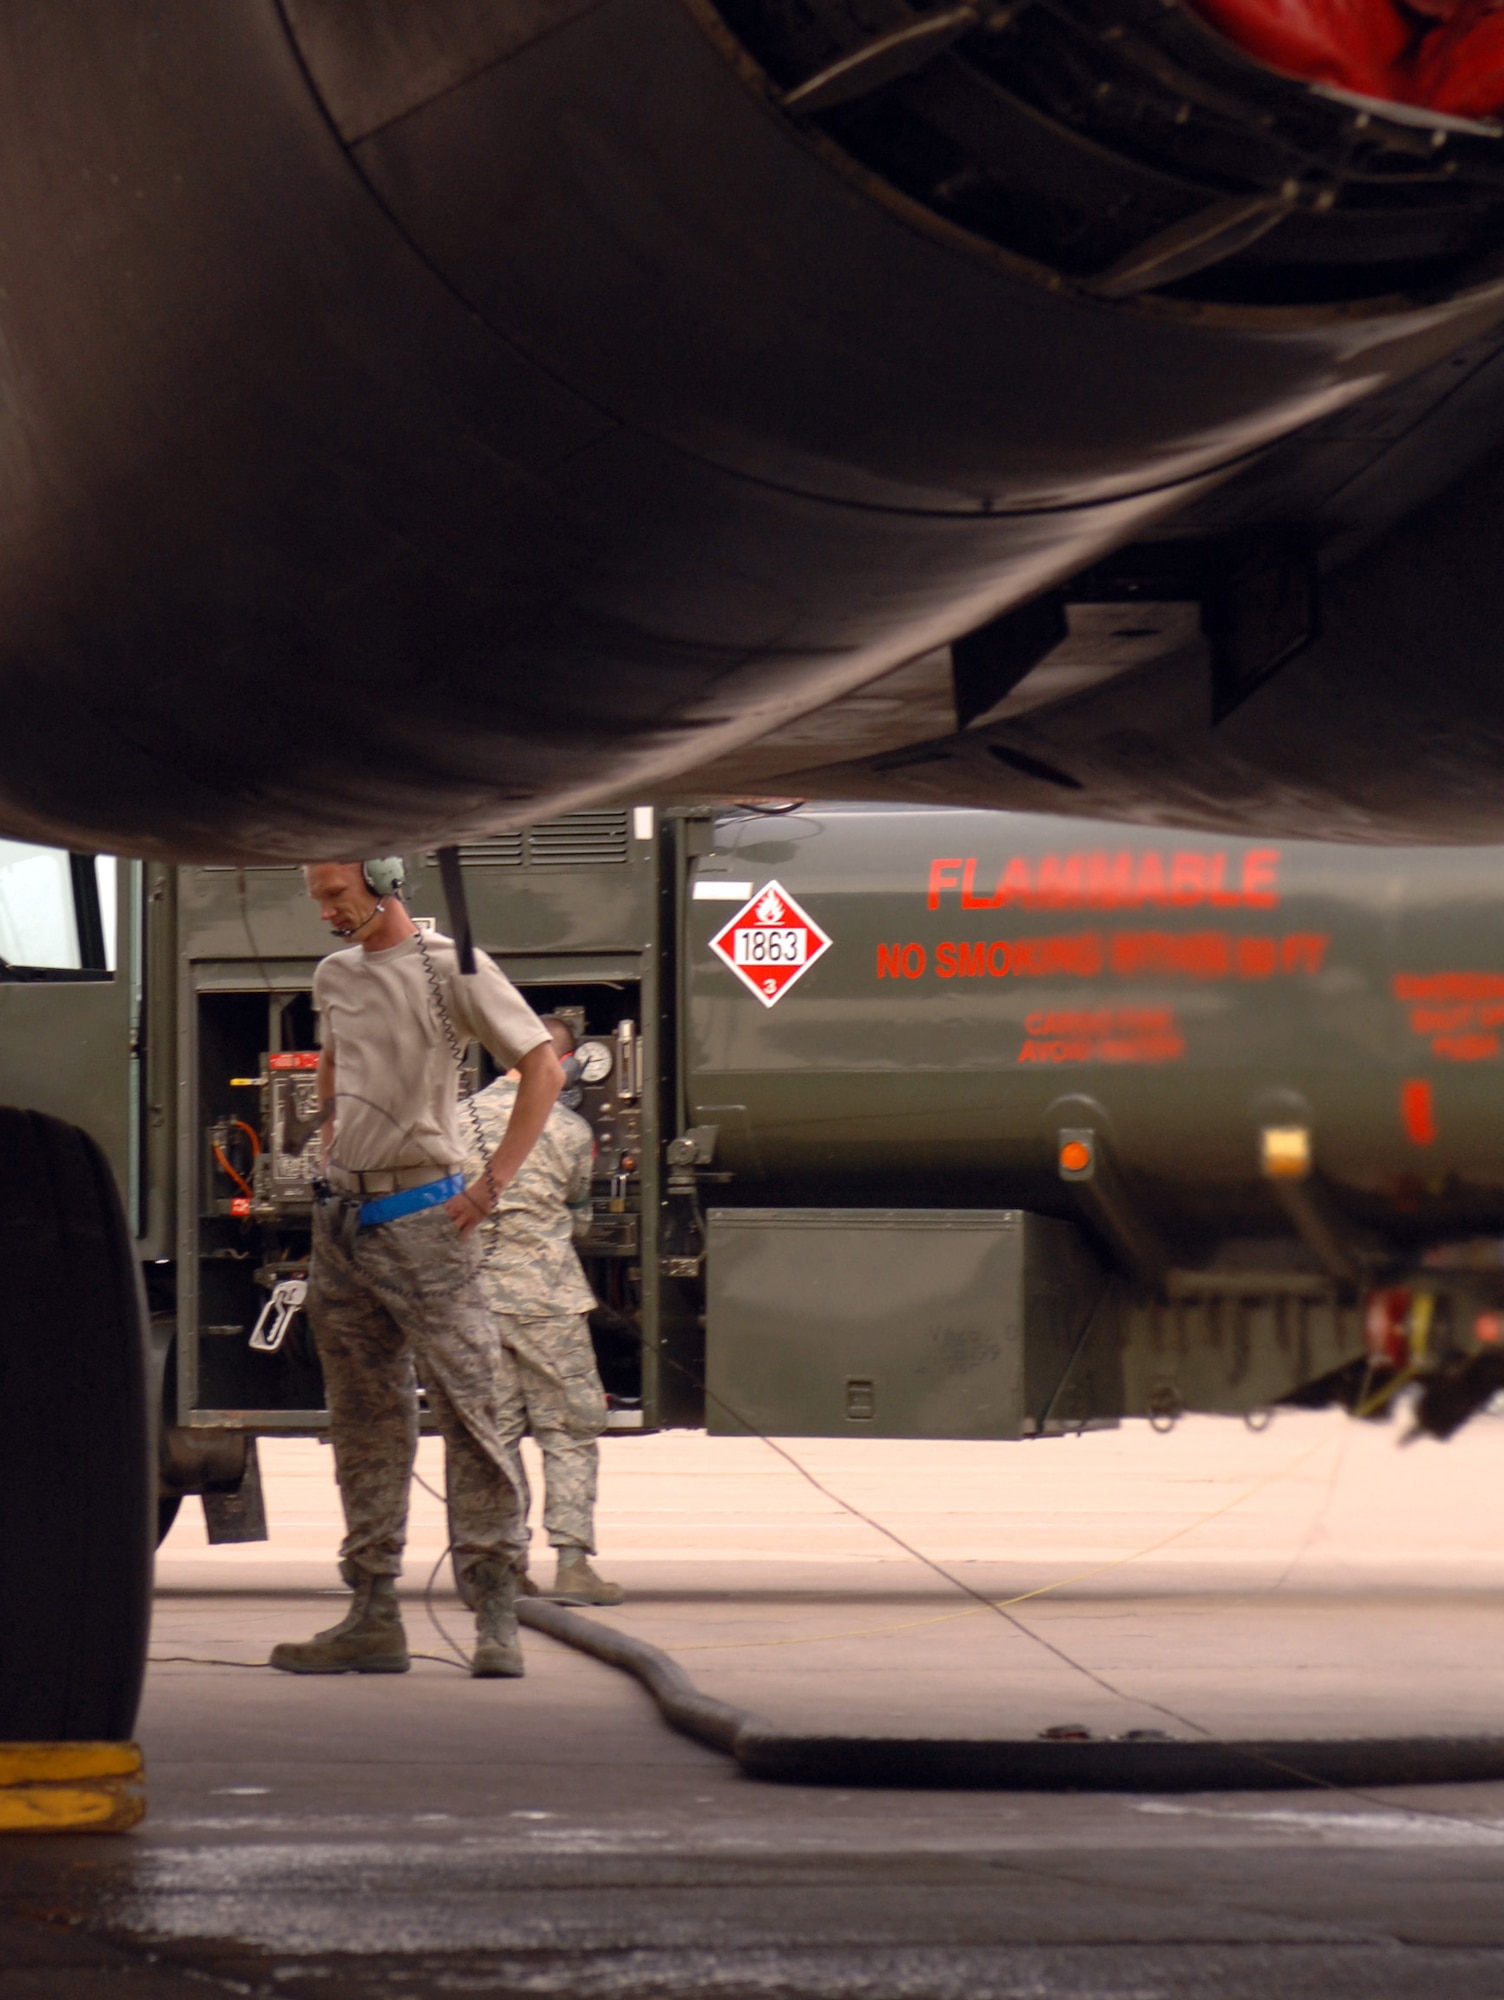 DYESS AIR FORCE BASE, Texas-- Staff Sgt. Alex Speener, B-1 Crew Chief, awaits the ok to attach fuel lines containing a 50/50 blend of synthetic and petroleum to a B-1 Bomber, March 17. The Air Force is currently in the process of evaluating and certifying this alternative fuel, derived from natural gas using the Fischer-Tropsch process, for all Air Force aircraft. (U.S. Air Force photo by Senior Airman Courtney Richardson)